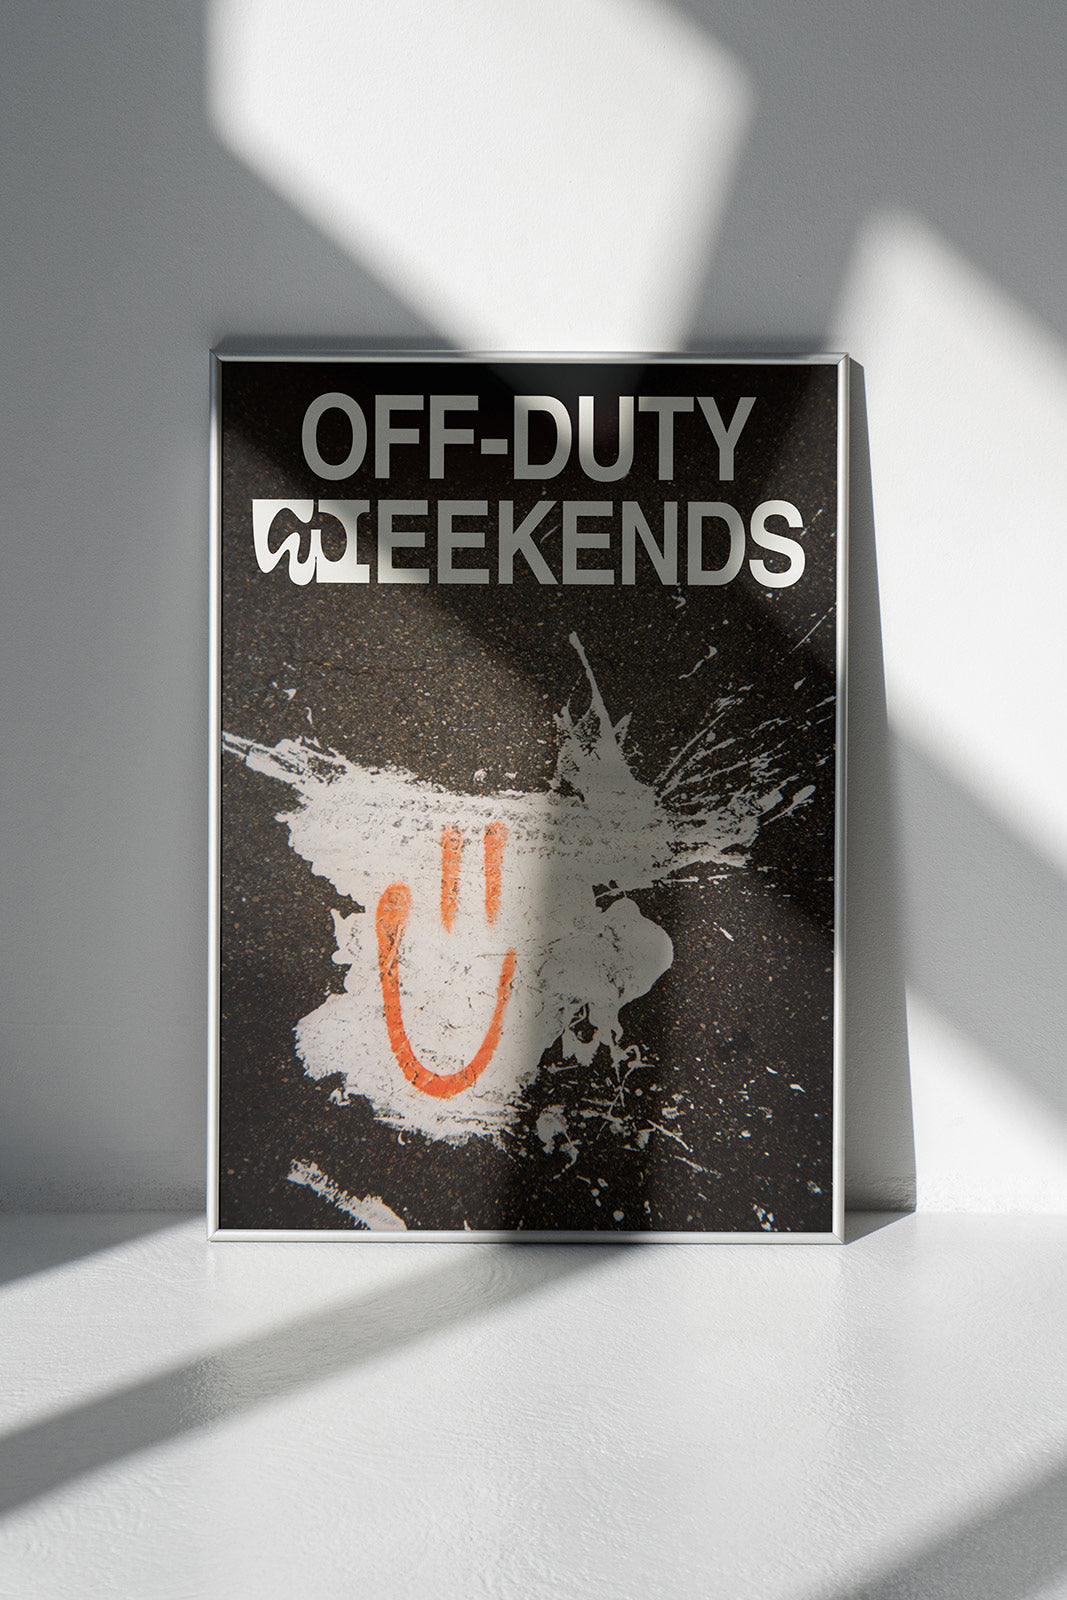 Framed Duties Smiley print poster featuring a spray-painted smiley face on a white paint splash on the ground, with text saying 'OFF-DUTY WEEKENDS', standing on a white floor and leaning against a white wall.